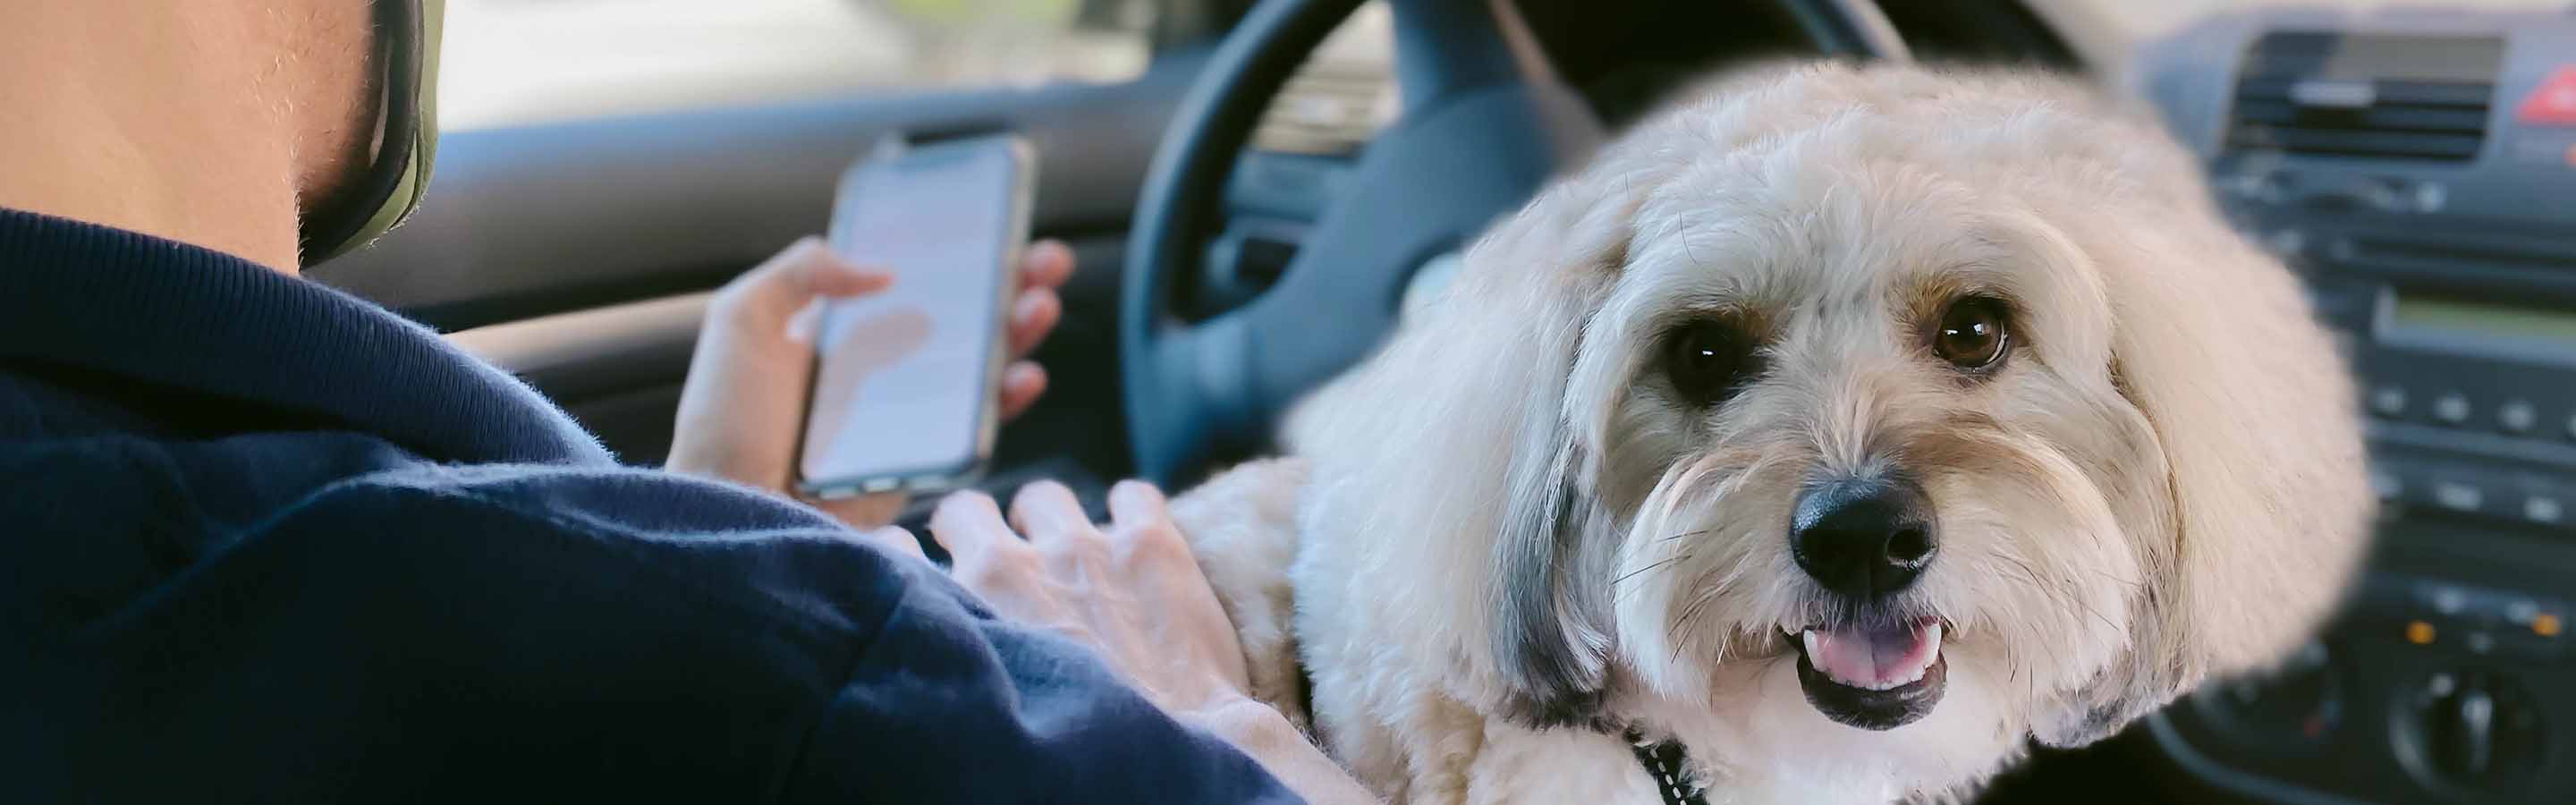 Small white dog sitting on owner's lap in parked car while owner checks in to veterinary clinic on his phone